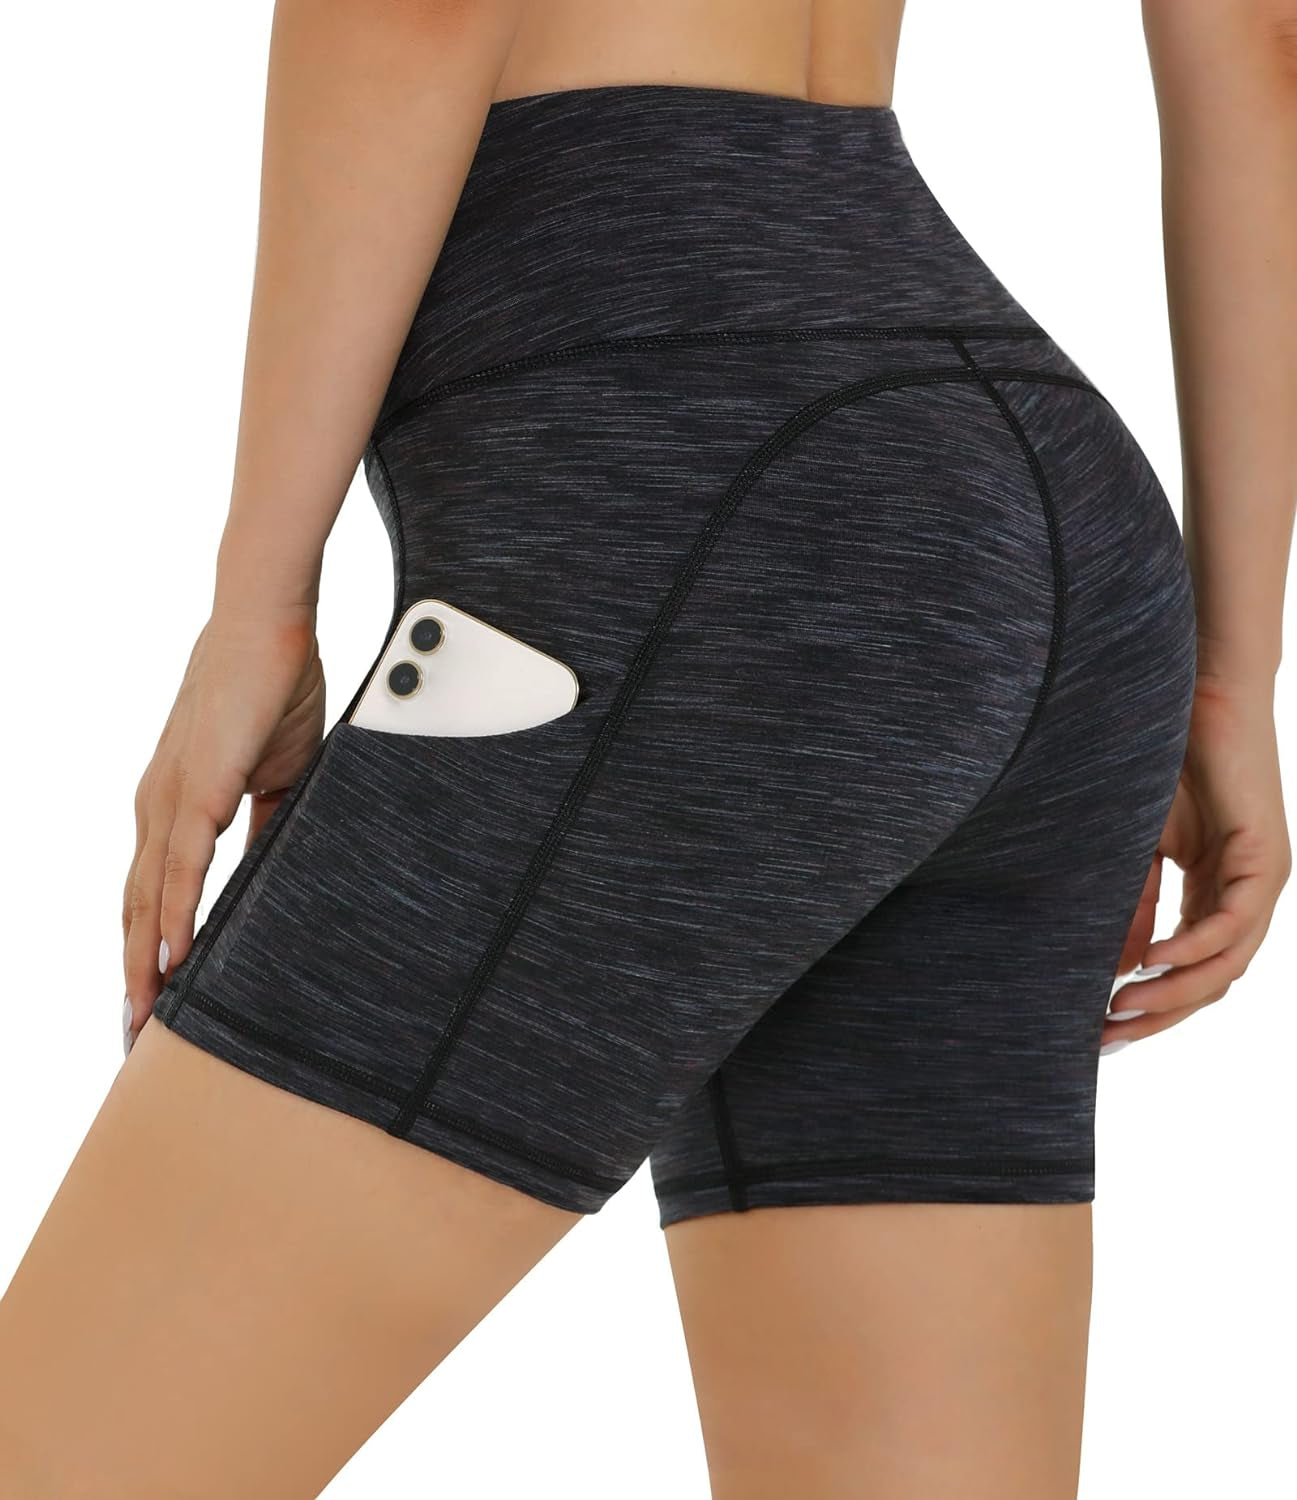 Yoga Shorts for Women with Pockets 8"/5" Biker Shorts for Women High Waisted Workout Shorts Compression Running Shorts